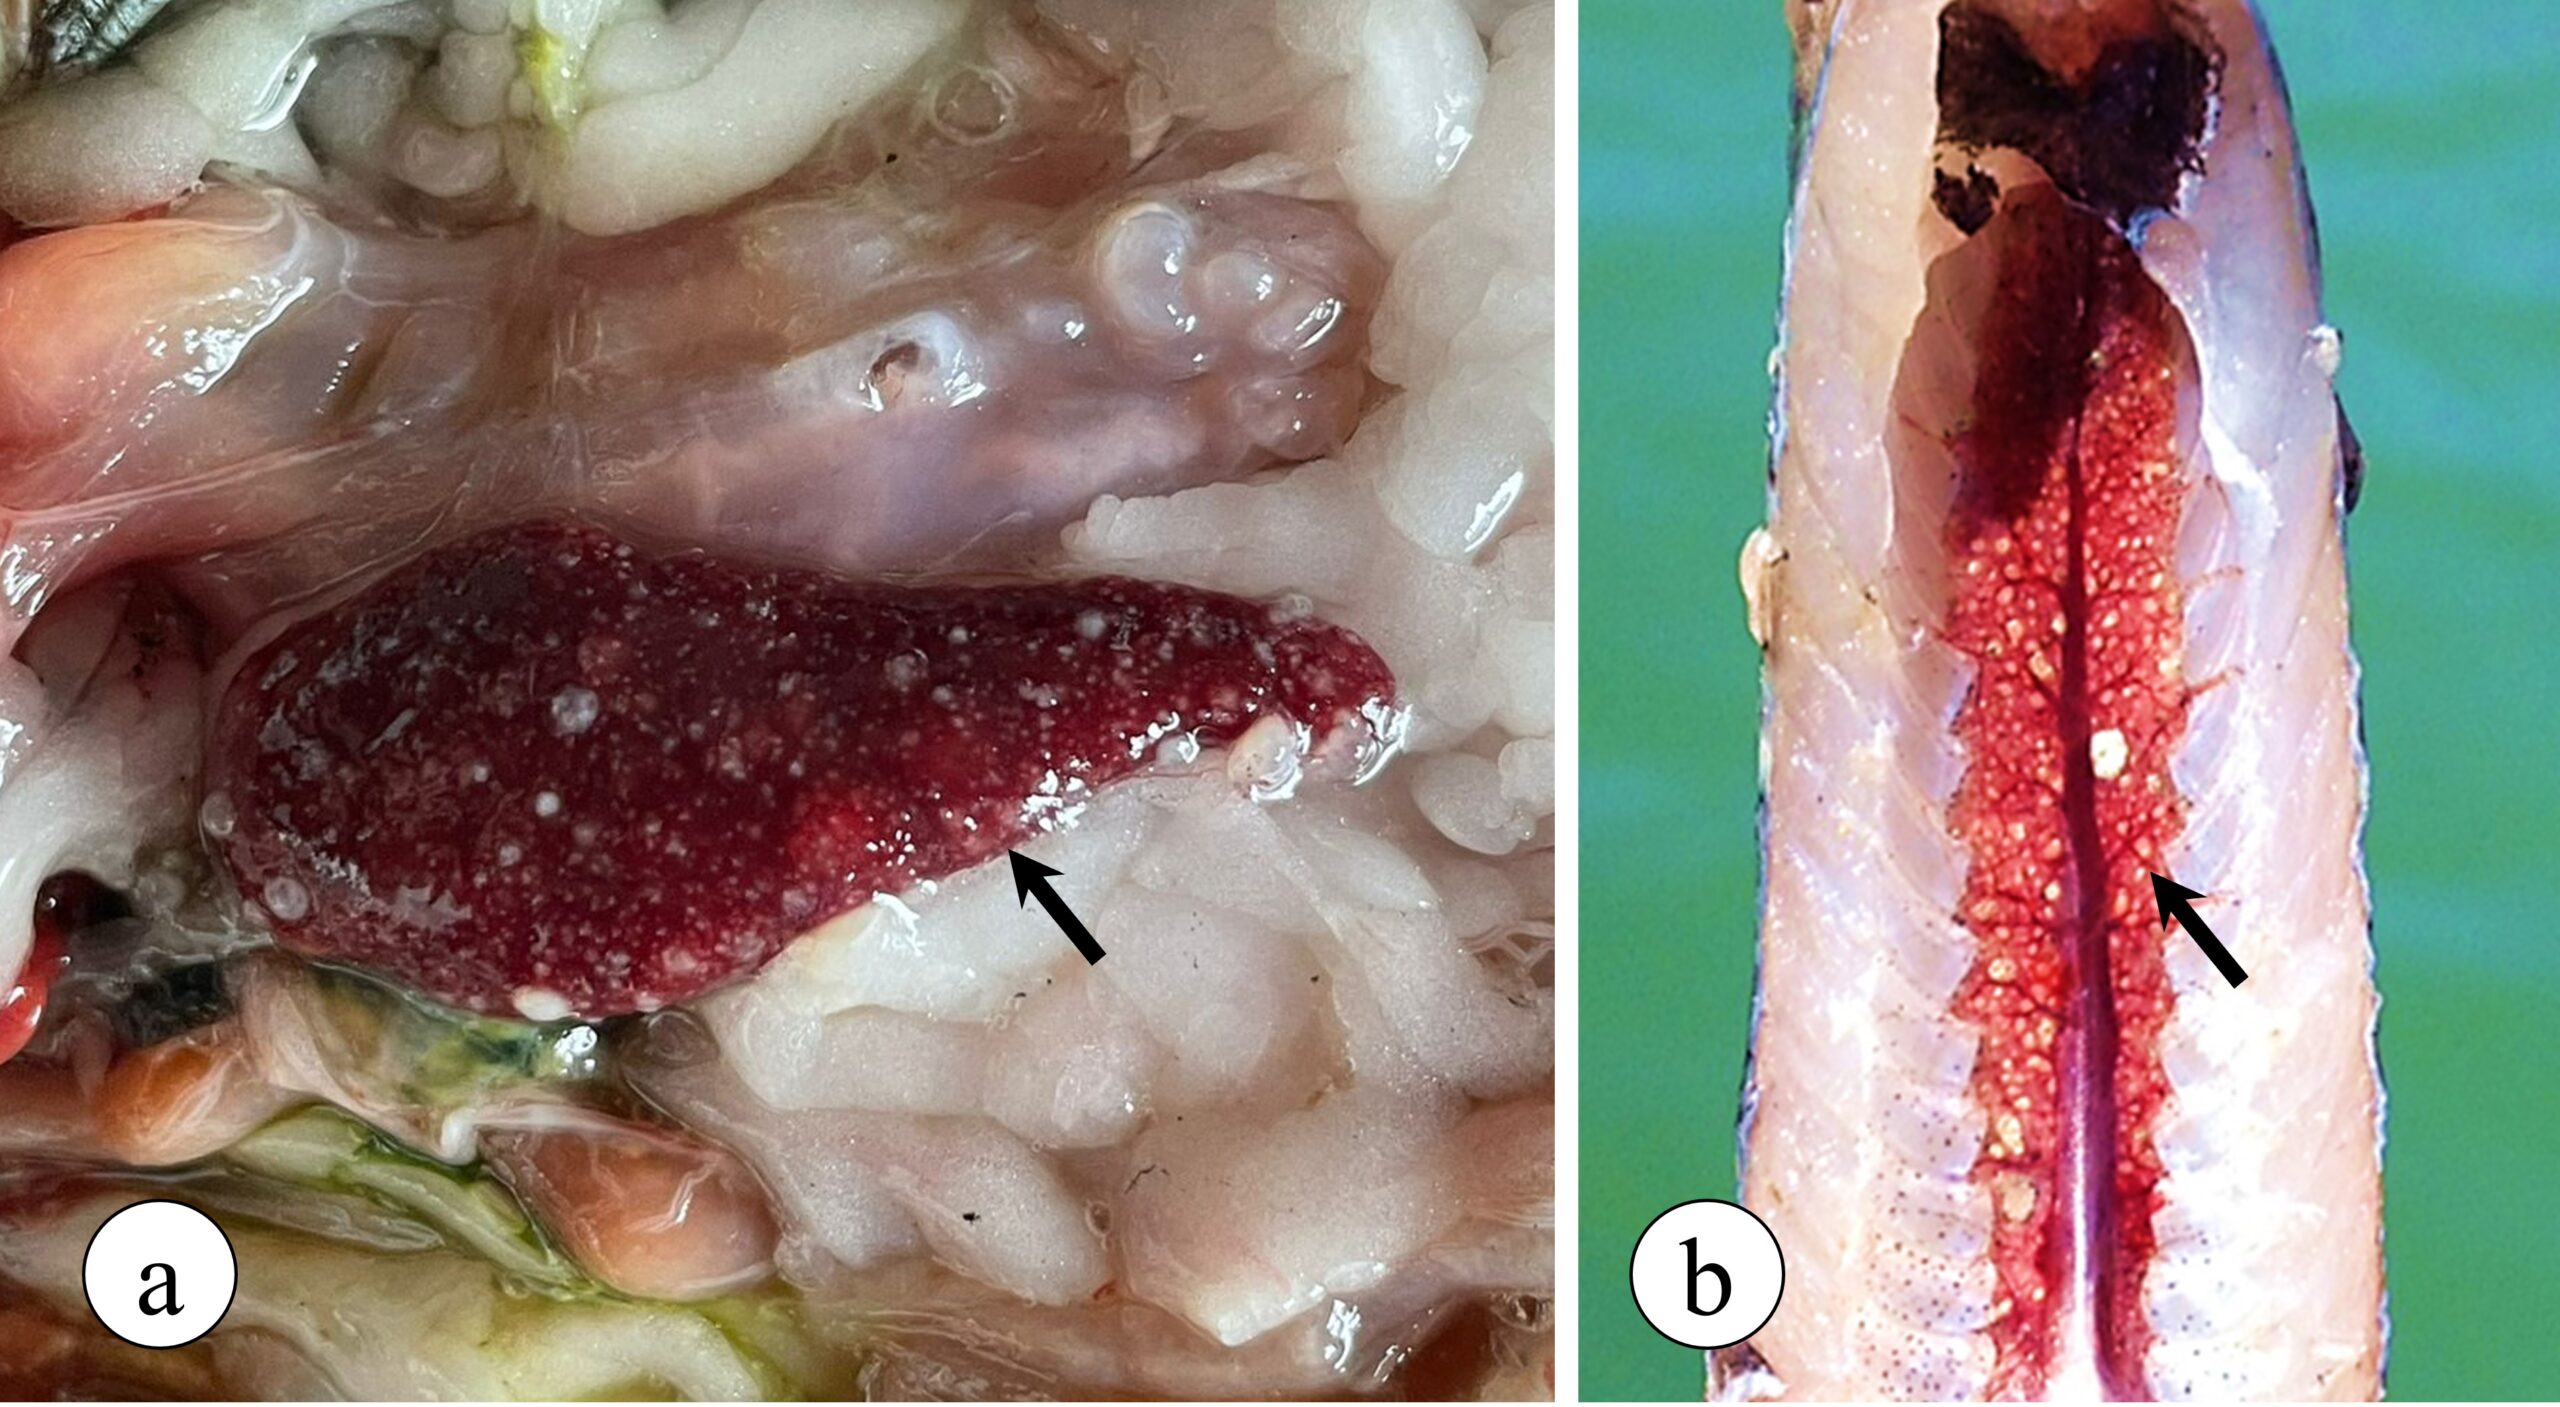 Figure 2. Granulomatous lesions observed in Nile tilapia with francisellosis. (a) Spleen exhibiting multiple granulomas (arrow) in addition to enlargement of the organ (splenomegaly). (b) Caudal kidney showing multiple granulomas.